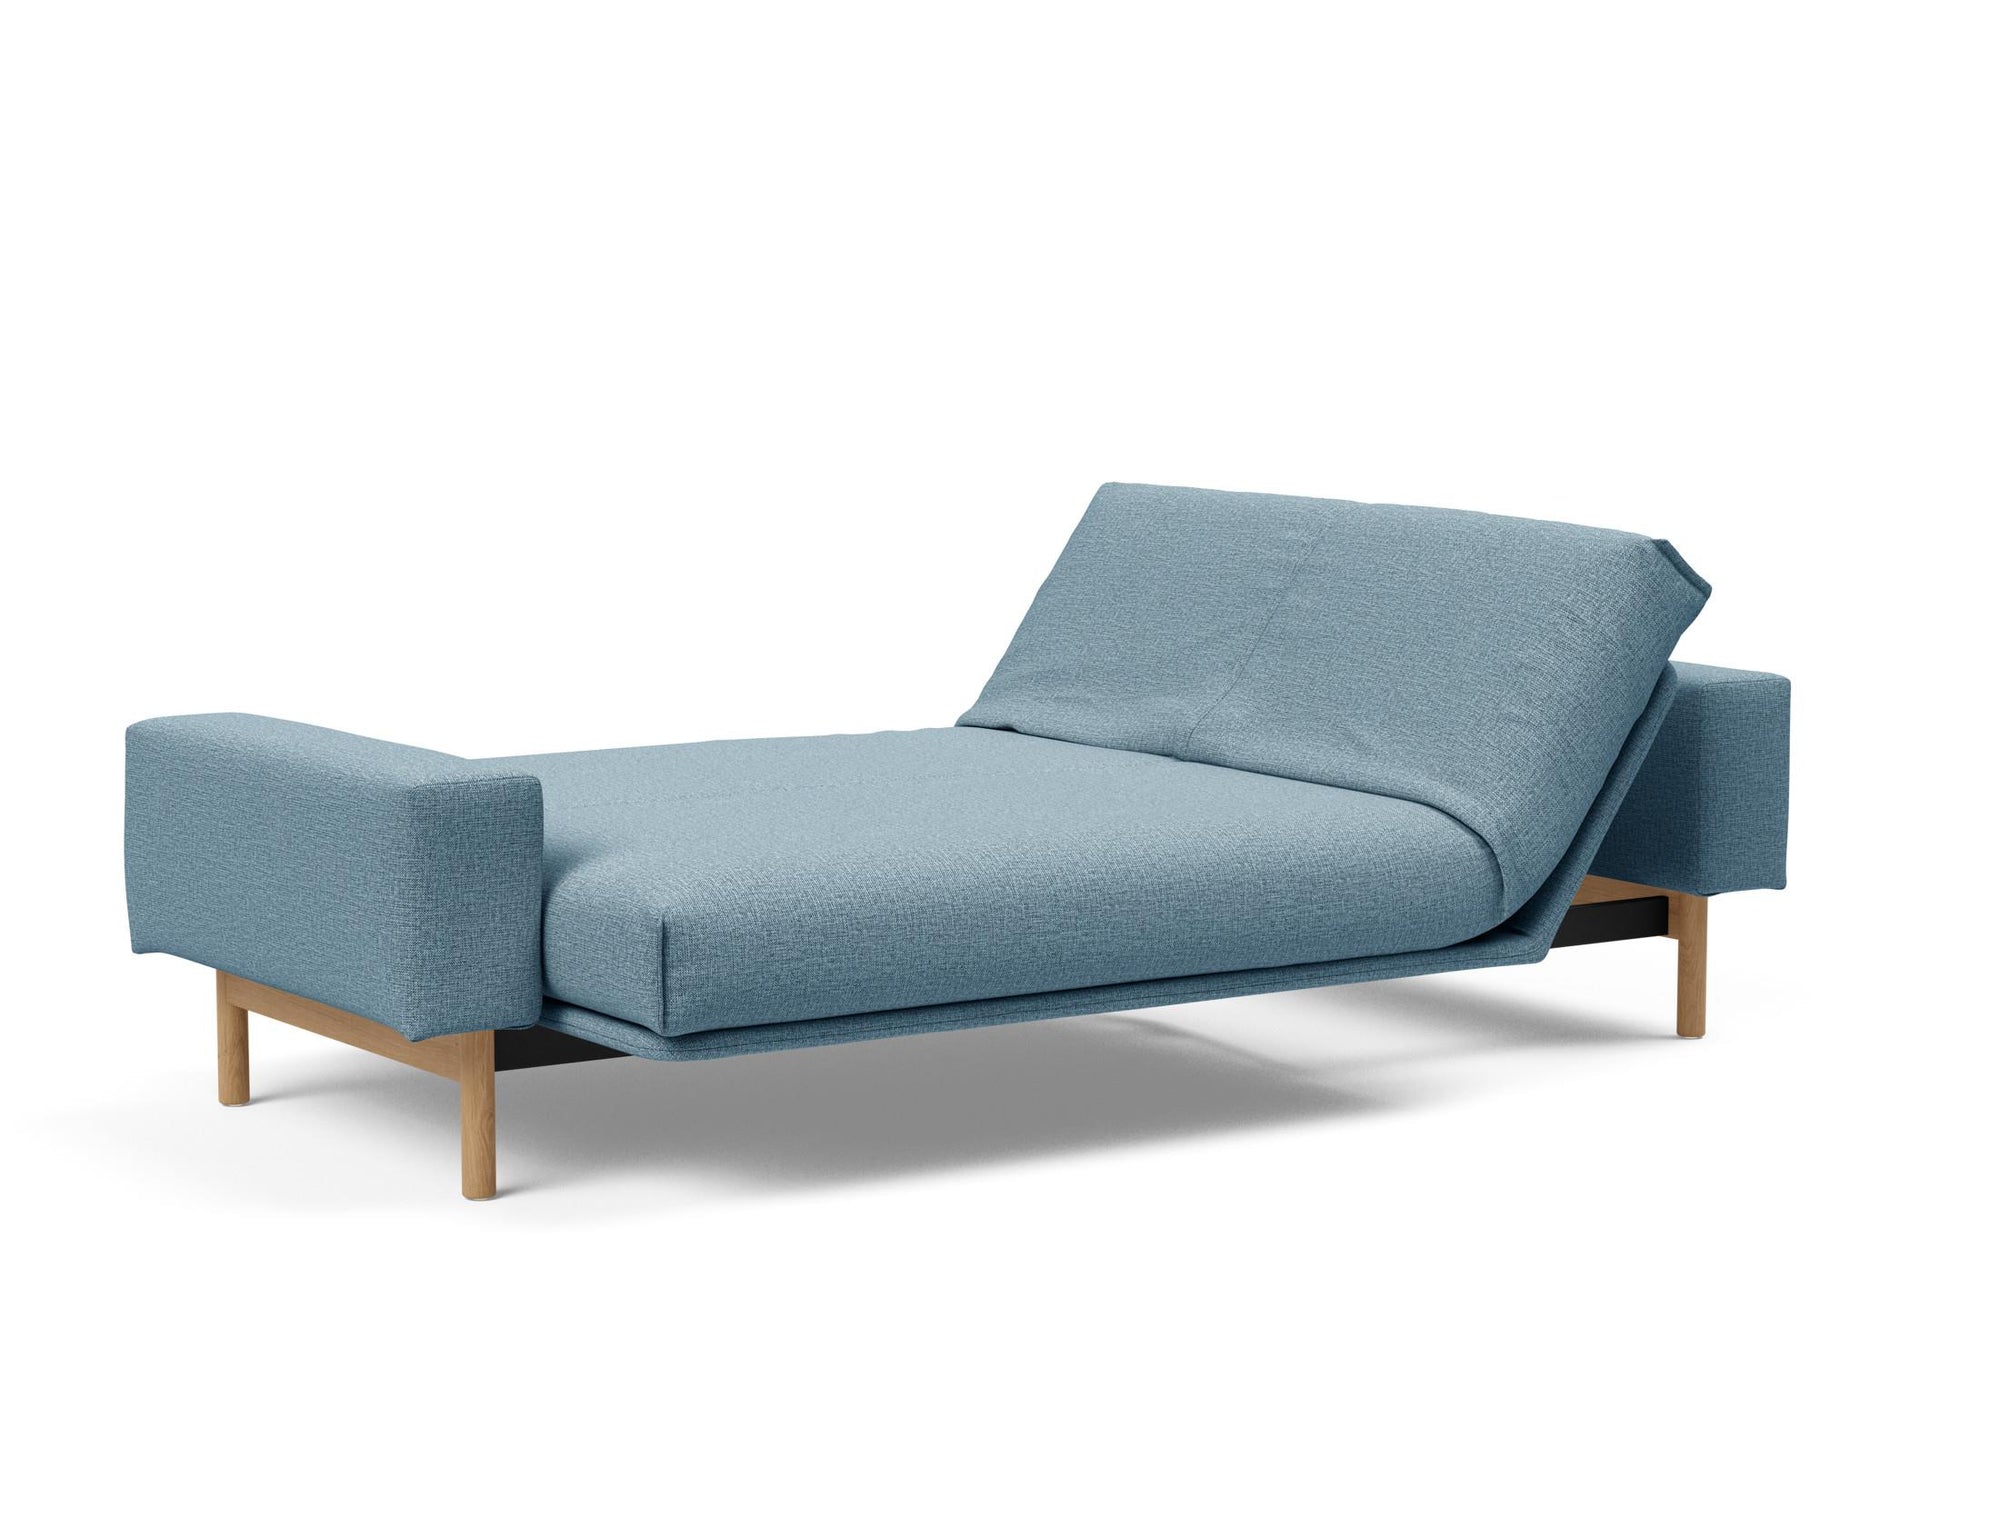 MIMER Luxury Soft Sofa Bed